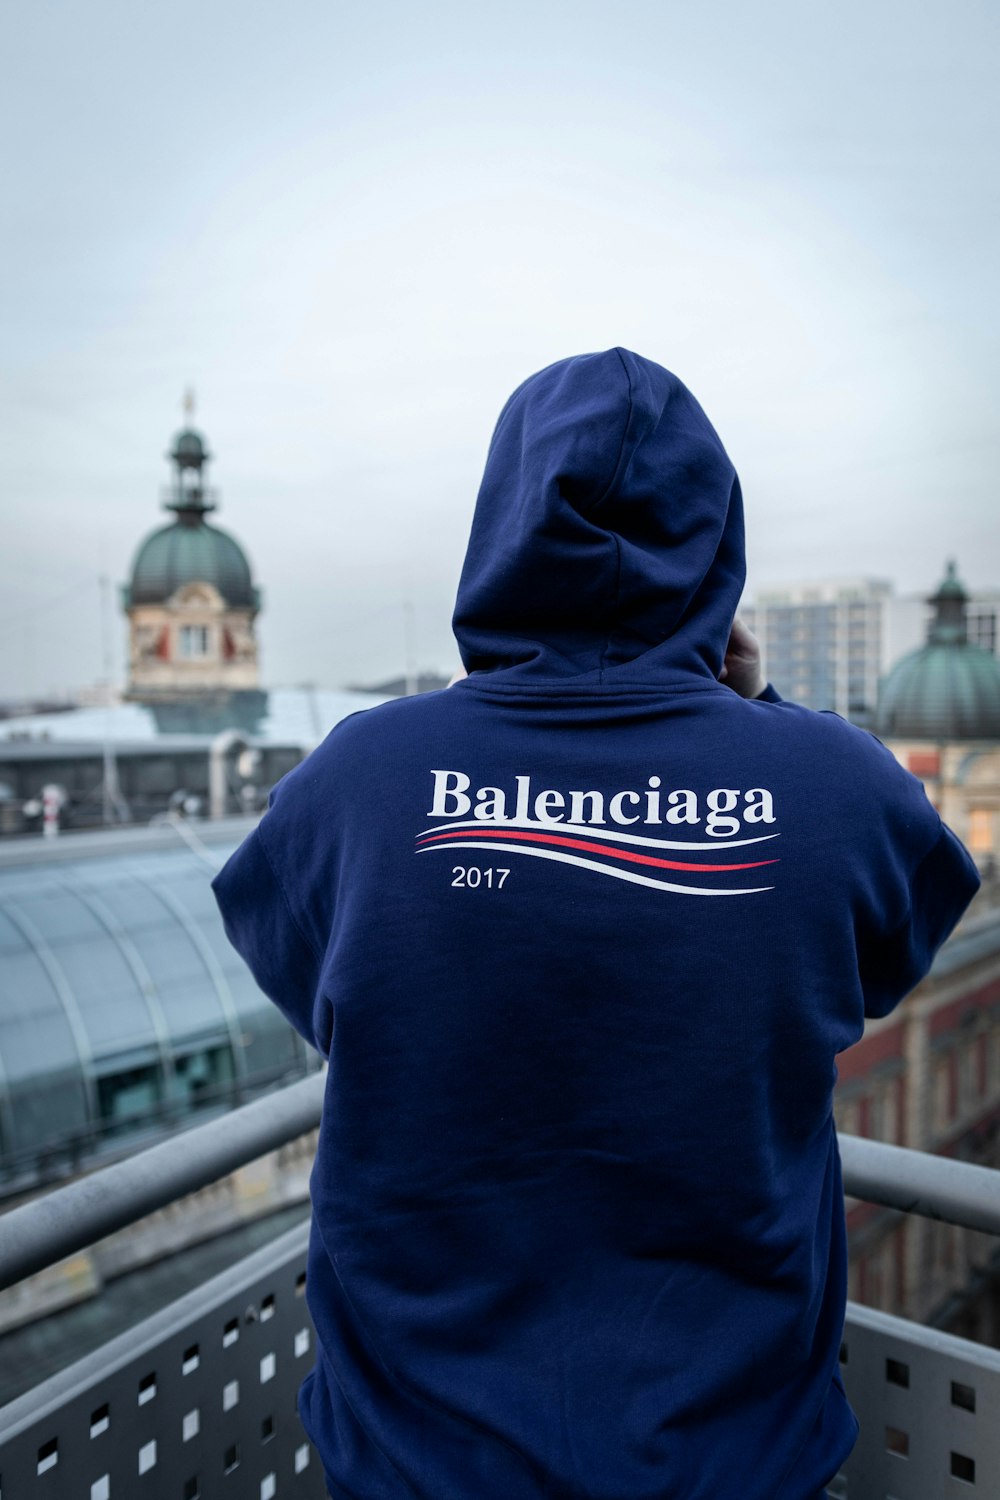 100+ Balenciaga Pictures [HD] | Download Free Images on Unsplash